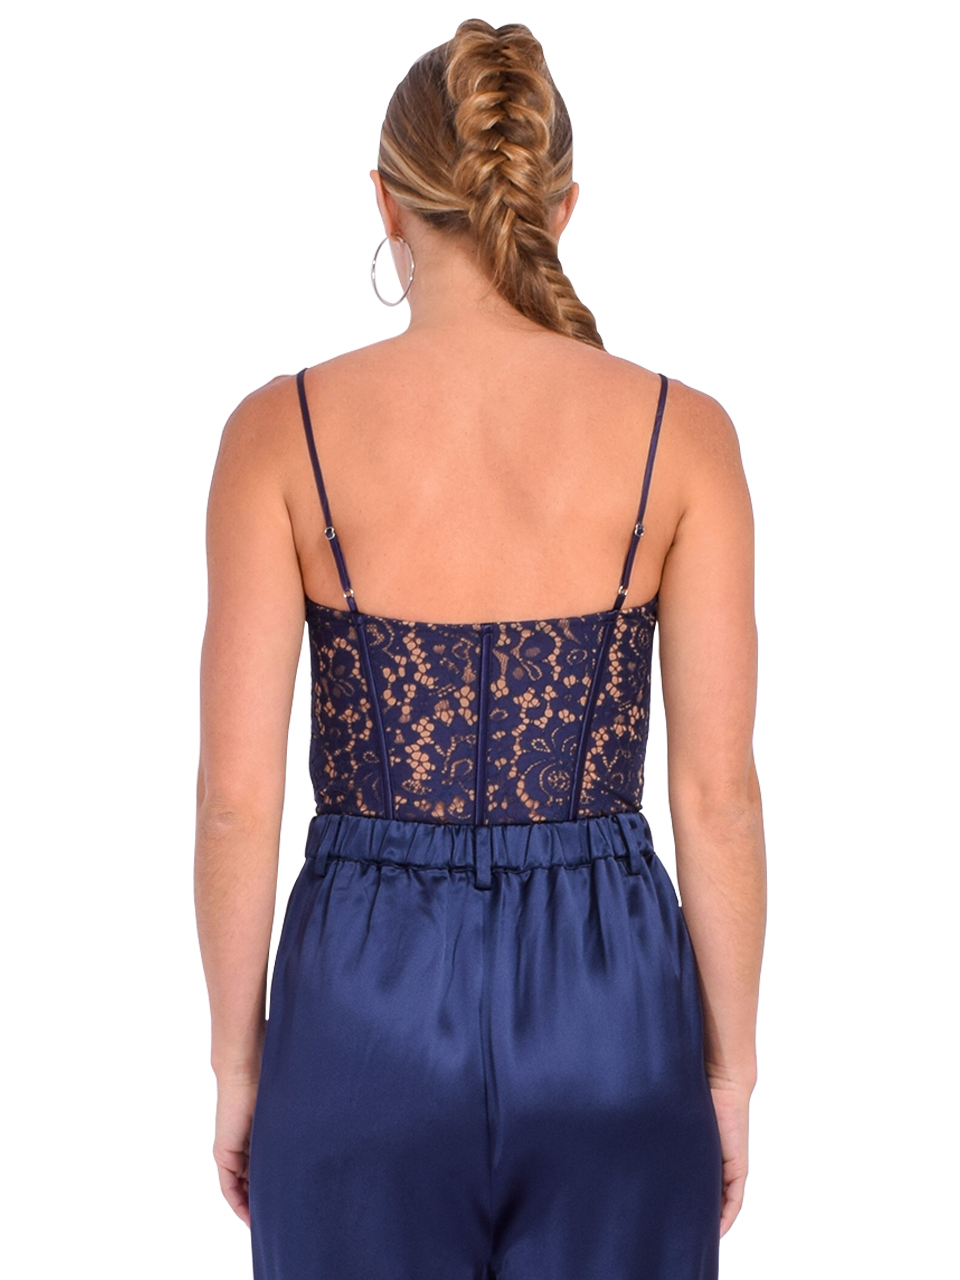 CAMI NYC Anne Corded Lace Bodysuit in Storm Back View 